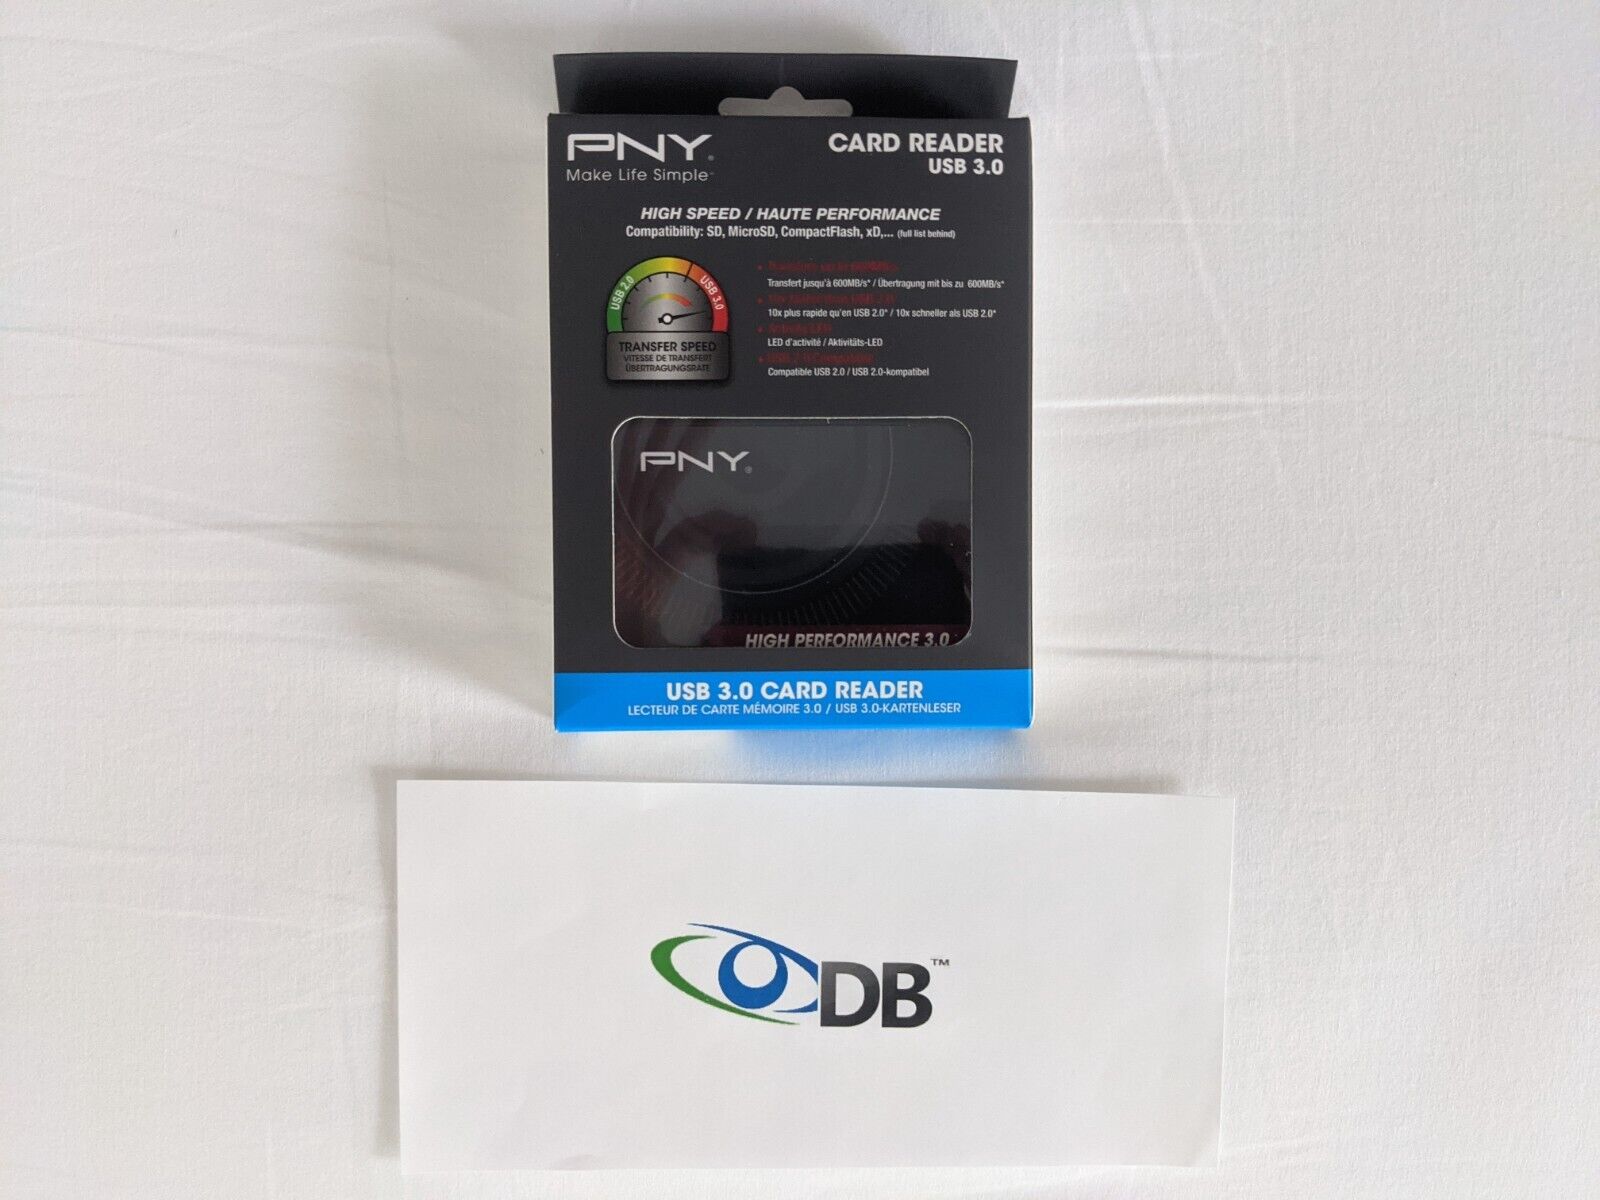 PNY High Performance USB 3.0 Card Reader for Windows and Mac PCs